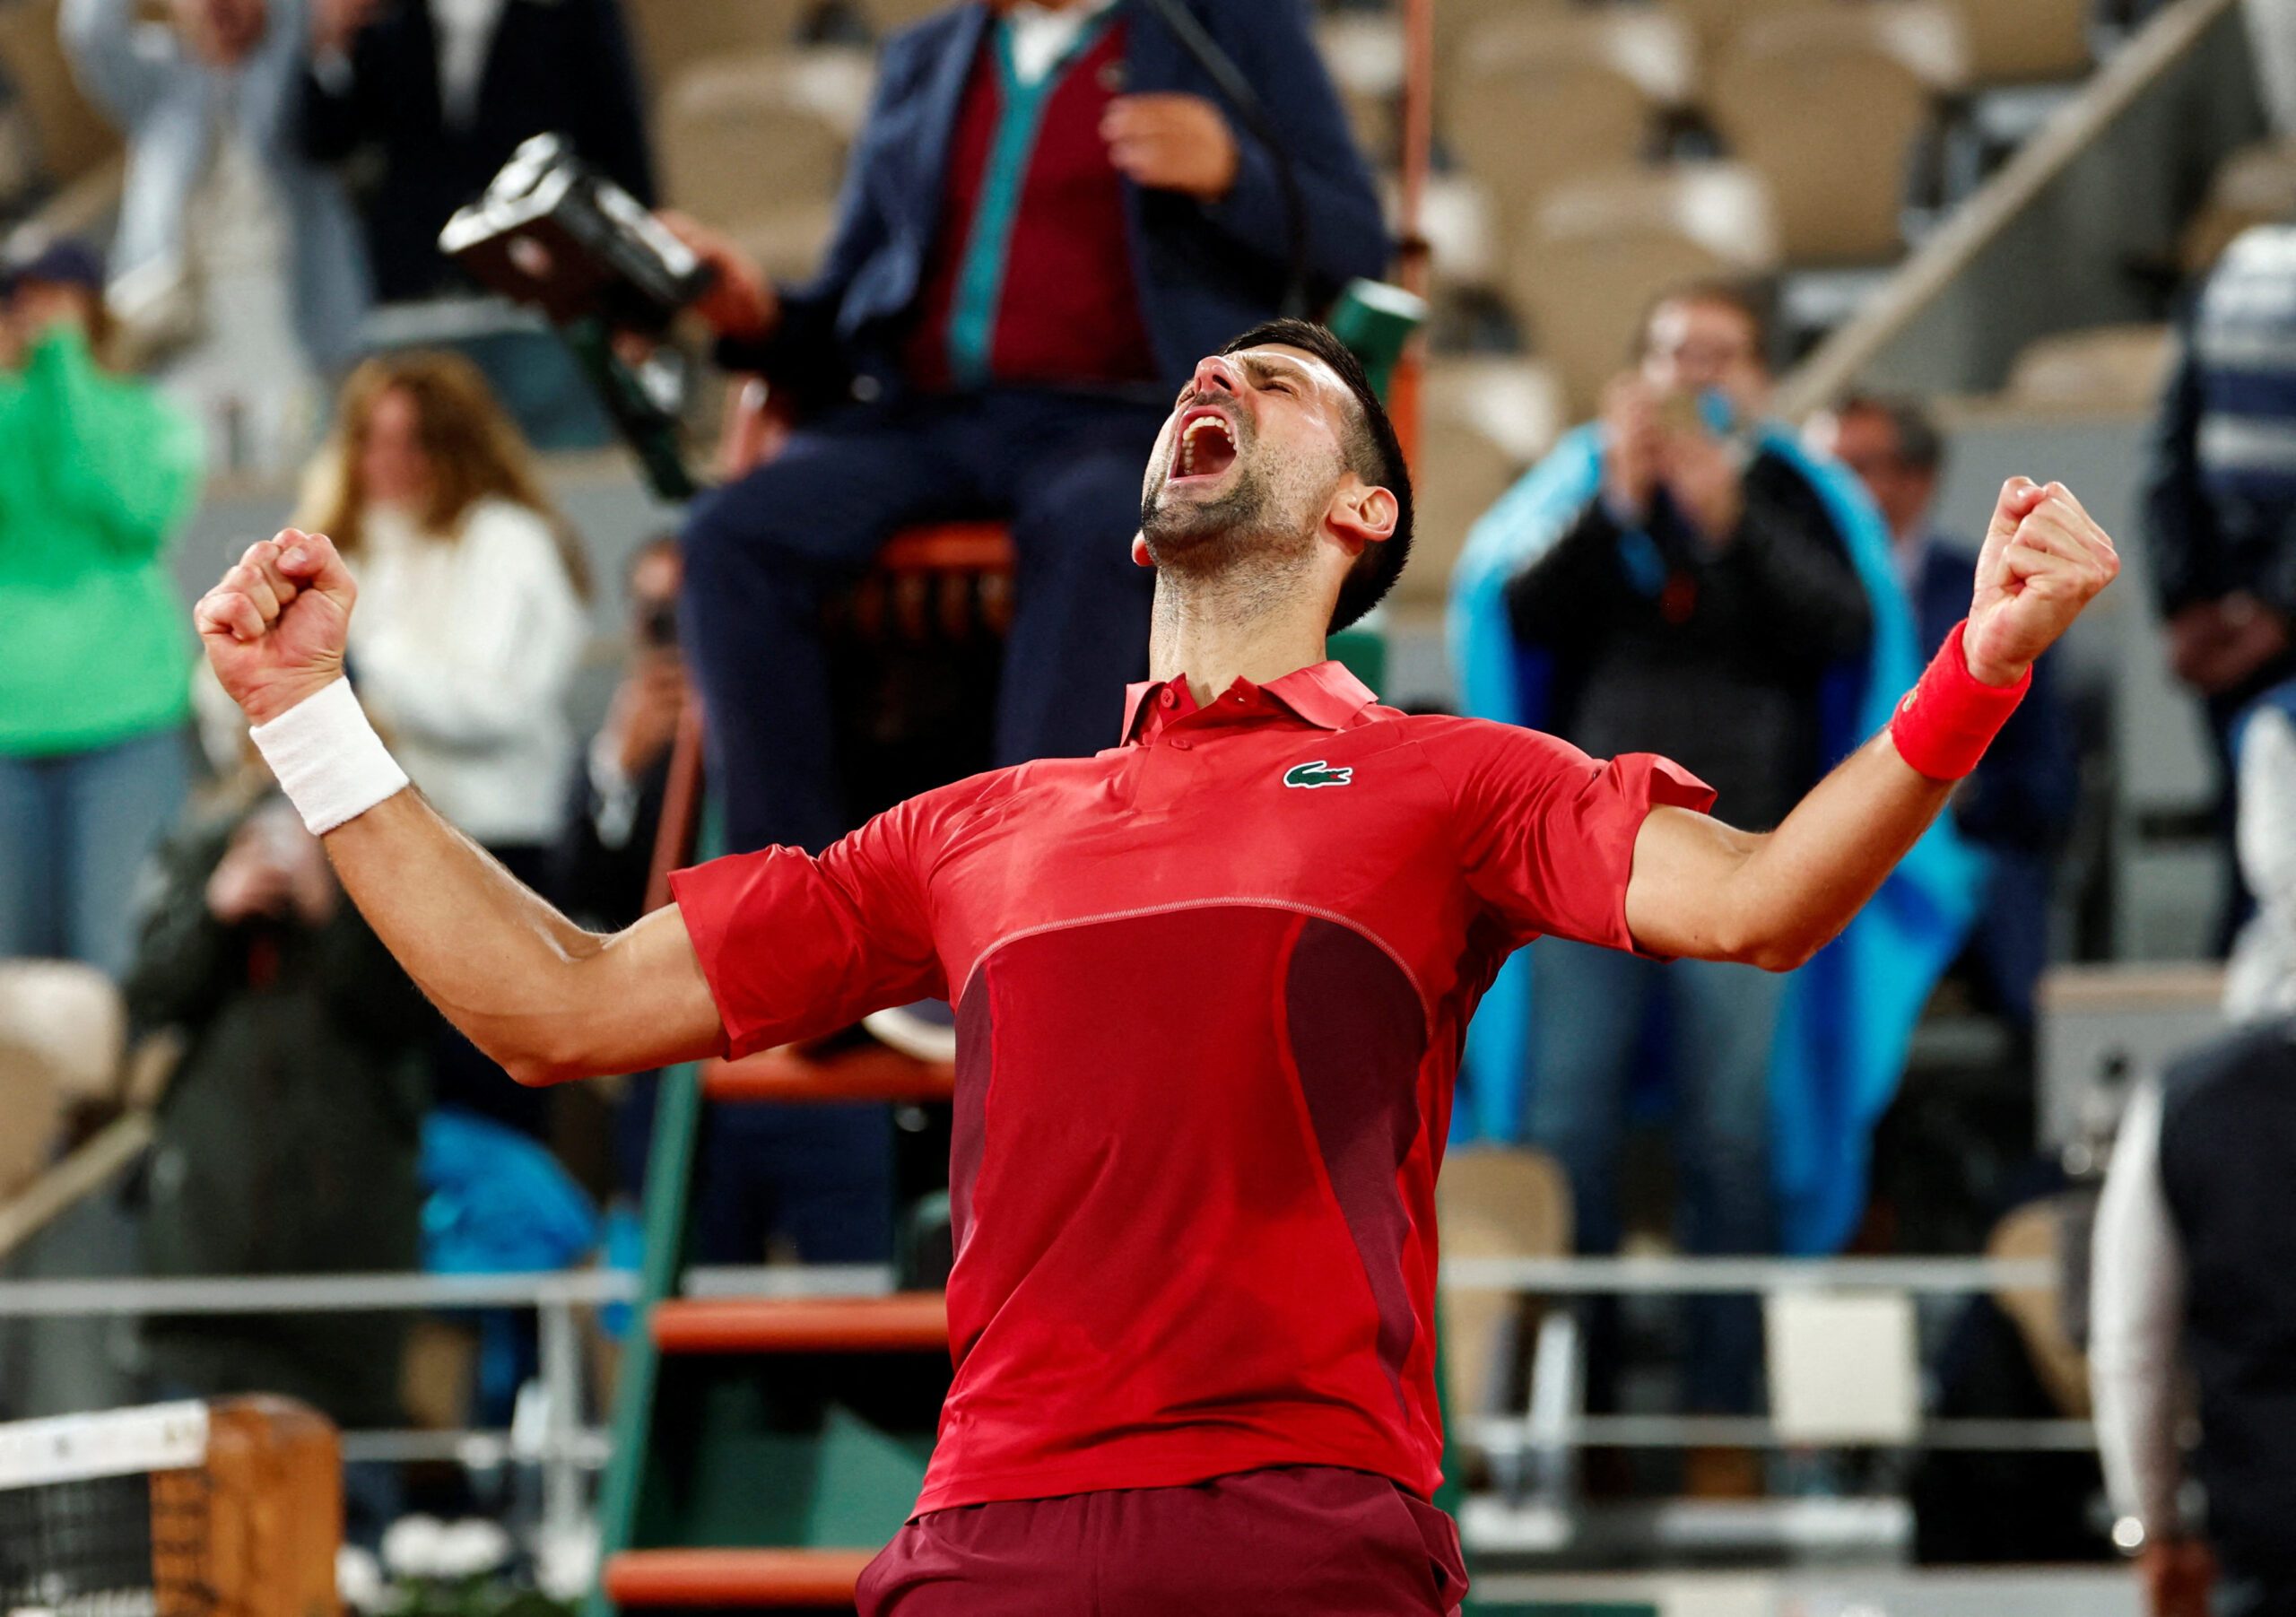 Marathon man Djokovic hangs on in latest ever finish at French Open